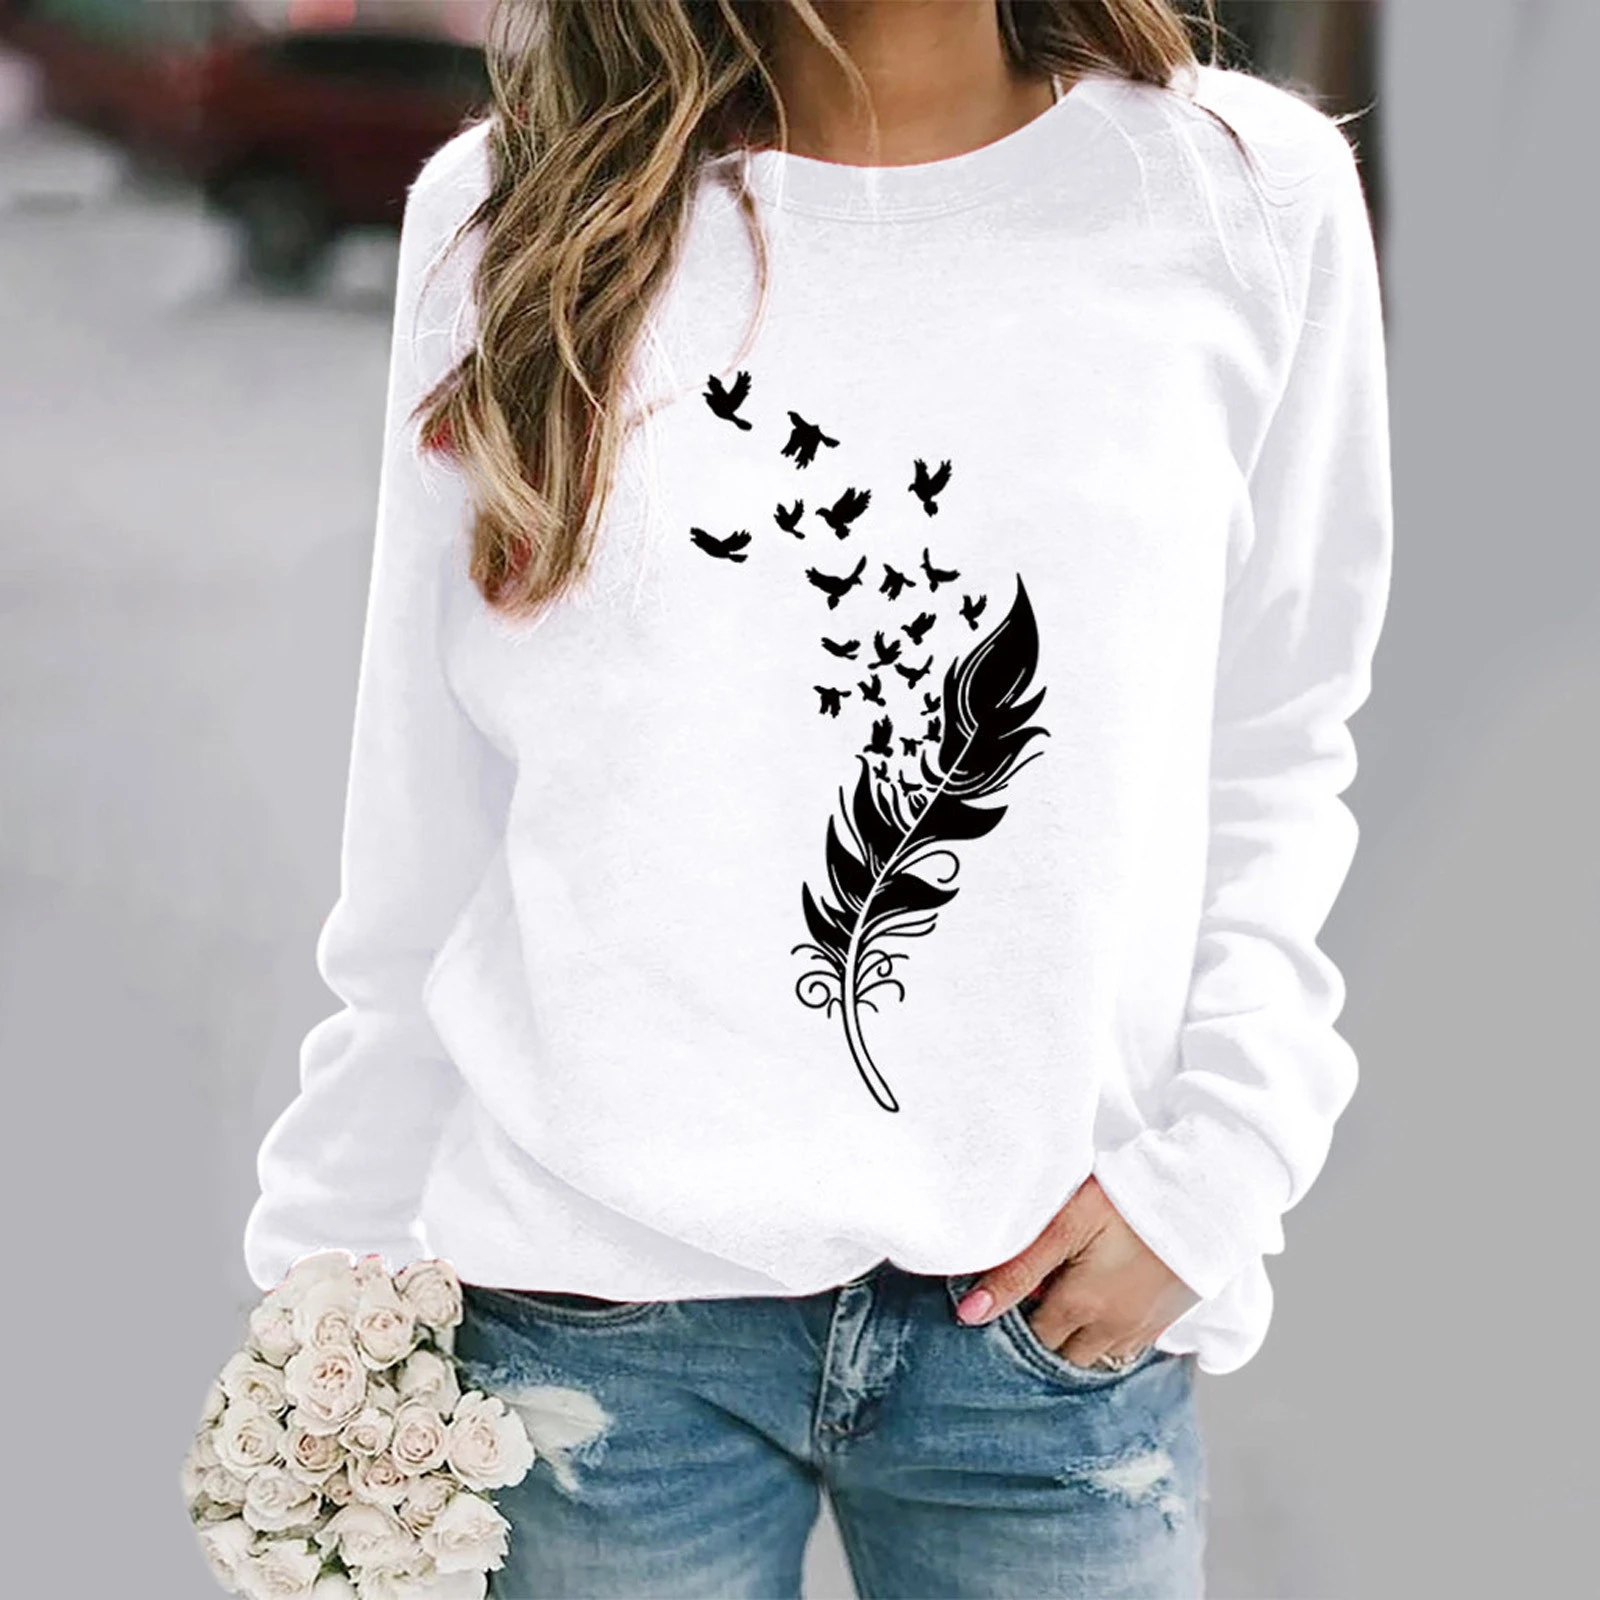 2021 Ladies Feather Print T-shirt Autumn and Winter Ladies Casual Sweater Pullover Long-sleeved Top Women New Round Neck Tops vintage tees